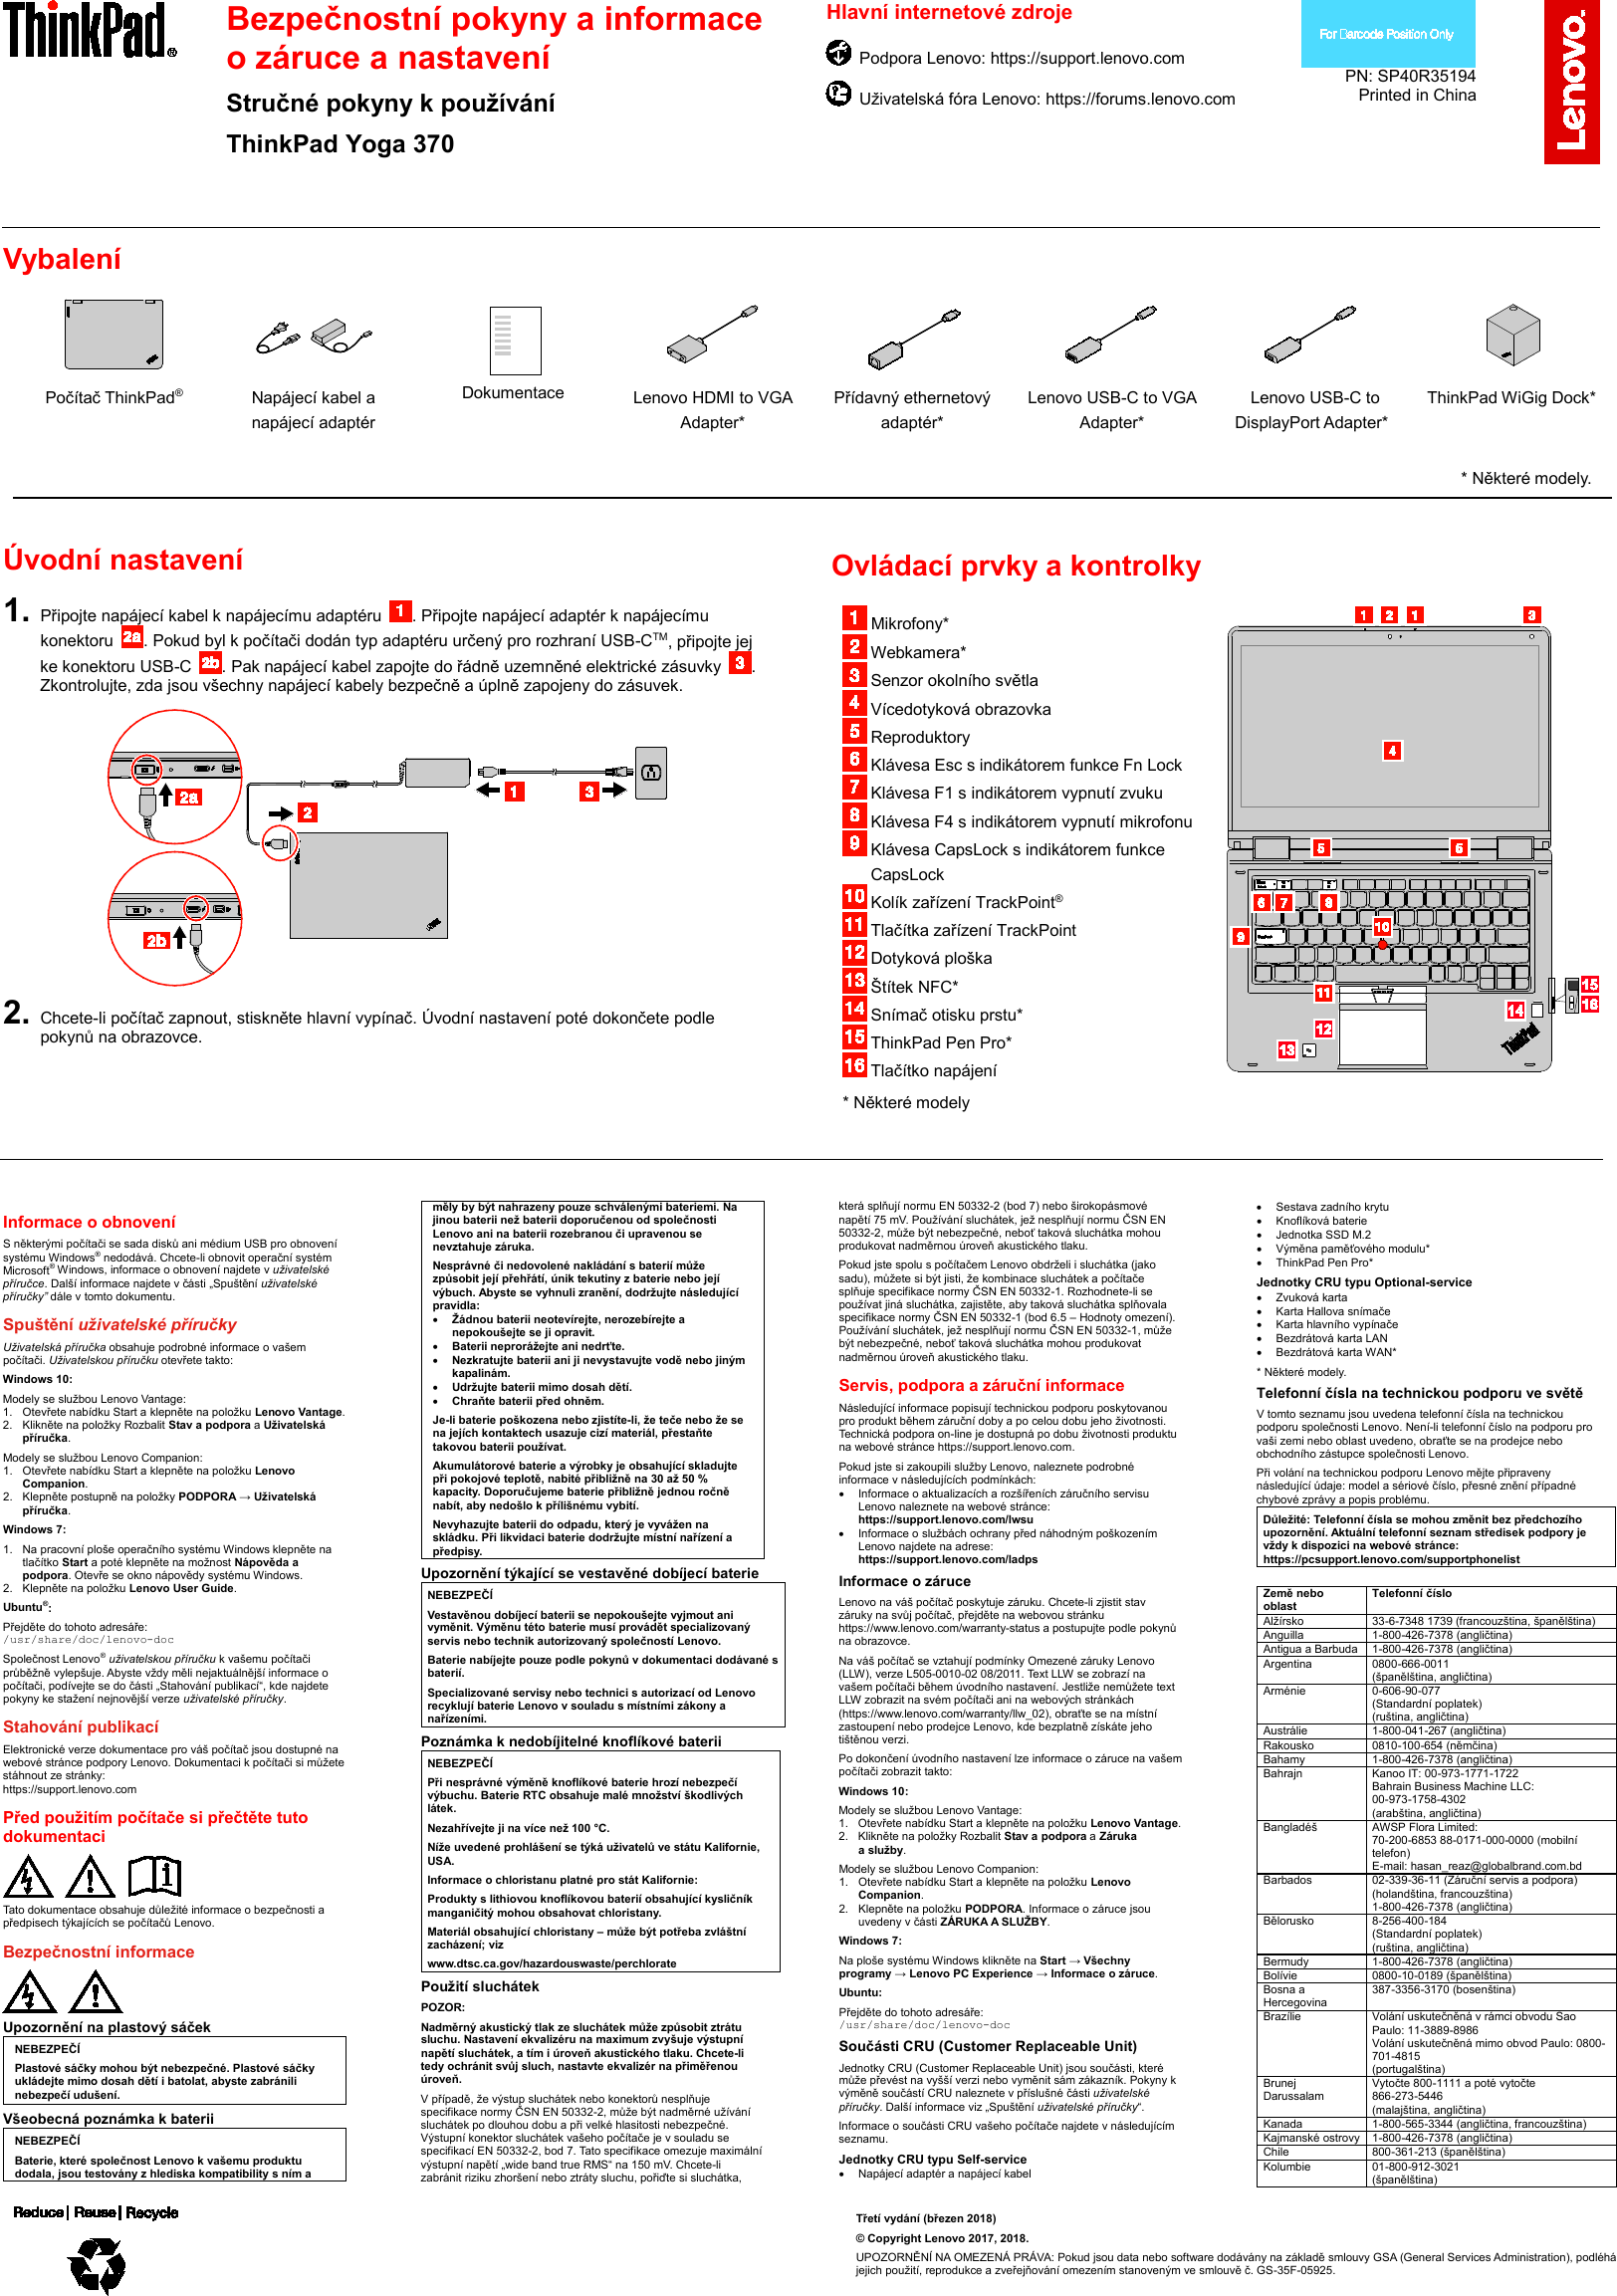 Page 1 of 2 - Lenovo  (Czech) Safety, Warranty And Setup Guide - Think Pad Yoga 370 Laptop (Think Pad) Swsg Cs